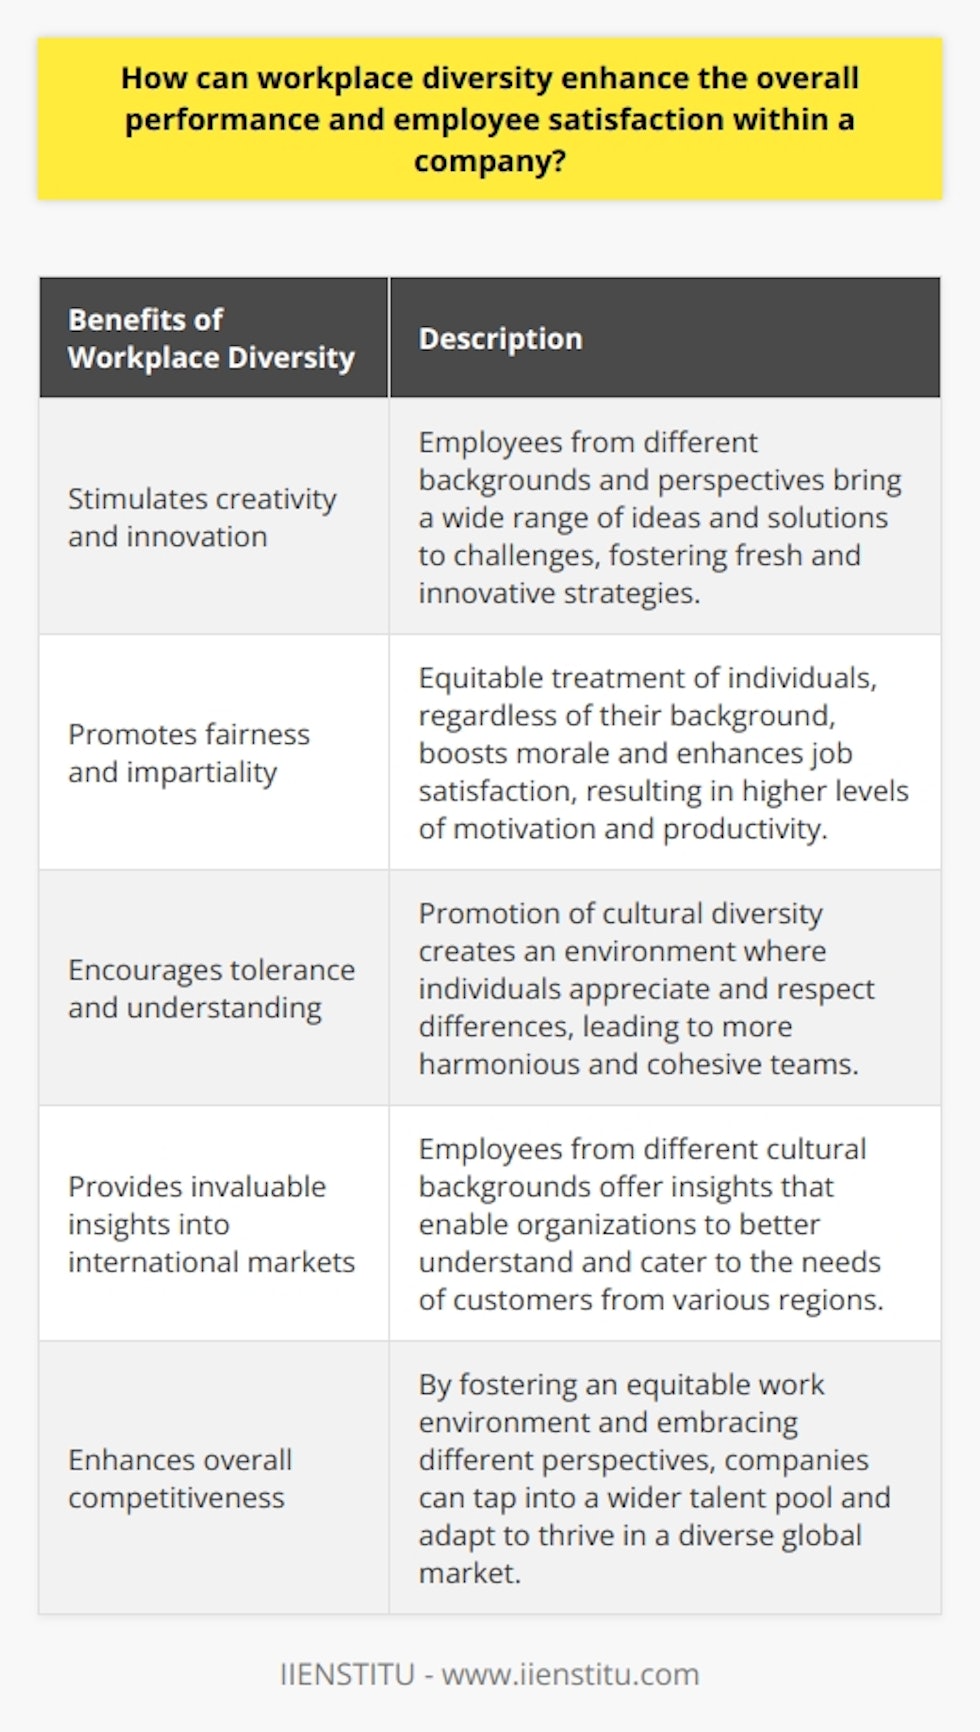 Workplace diversity is a crucial factor that can greatly enhance the overall performance and employee satisfaction within a company. By embracing diversity, organizations can reap numerous benefits that may not be commonly discussed but are vital for success.One significant advantage of workplace diversity is its ability to stimulate creativity and innovation. When employees from different backgrounds and perspectives collaborate, they bring forth a wide range of ideas and solutions to challenges. This diversity of thought can lead to the development of fresh and innovative strategies, ultimately driving the company forward.Moreover, diversity fosters employee satisfaction by promoting fairness and impartiality. When individuals are treated equitably, regardless of their background, they feel valued and recognized for their unique contributions. This positive reinforcement boosts morale and enhances job satisfaction, resulting in higher levels of motivation and productivity.Embracing diversity also encourages tolerance and understanding among employees. By promoting cultural diversity, companies facilitate an environment where individuals learn to appreciate and respect differences in backgrounds and perspectives. This understanding leads to more harmonious and cohesive teams, fostering collaboration and teamwork.Furthermore, a diverse workforce can greatly benefit companies in the global marketplace. Having employees from different cultural backgrounds offers invaluable insights into international markets, enabling organizations to better understand and cater to the needs of customers from various regions. This enhanced cultural competence can give companies a competitive advantage and significantly increase their customer service levels.In conclusion, workplace diversity plays a crucial role in enhancing performance, employee satisfaction, and overall competitiveness within a company. By fostering an equitable work environment and embracing different perspectives, organizations can create a strong foundation for sustainability and success. Prioritizing diversity not only allows companies to tap into a wider talent pool but also ensures that they can adapt and thrive in an increasingly diverse global market.